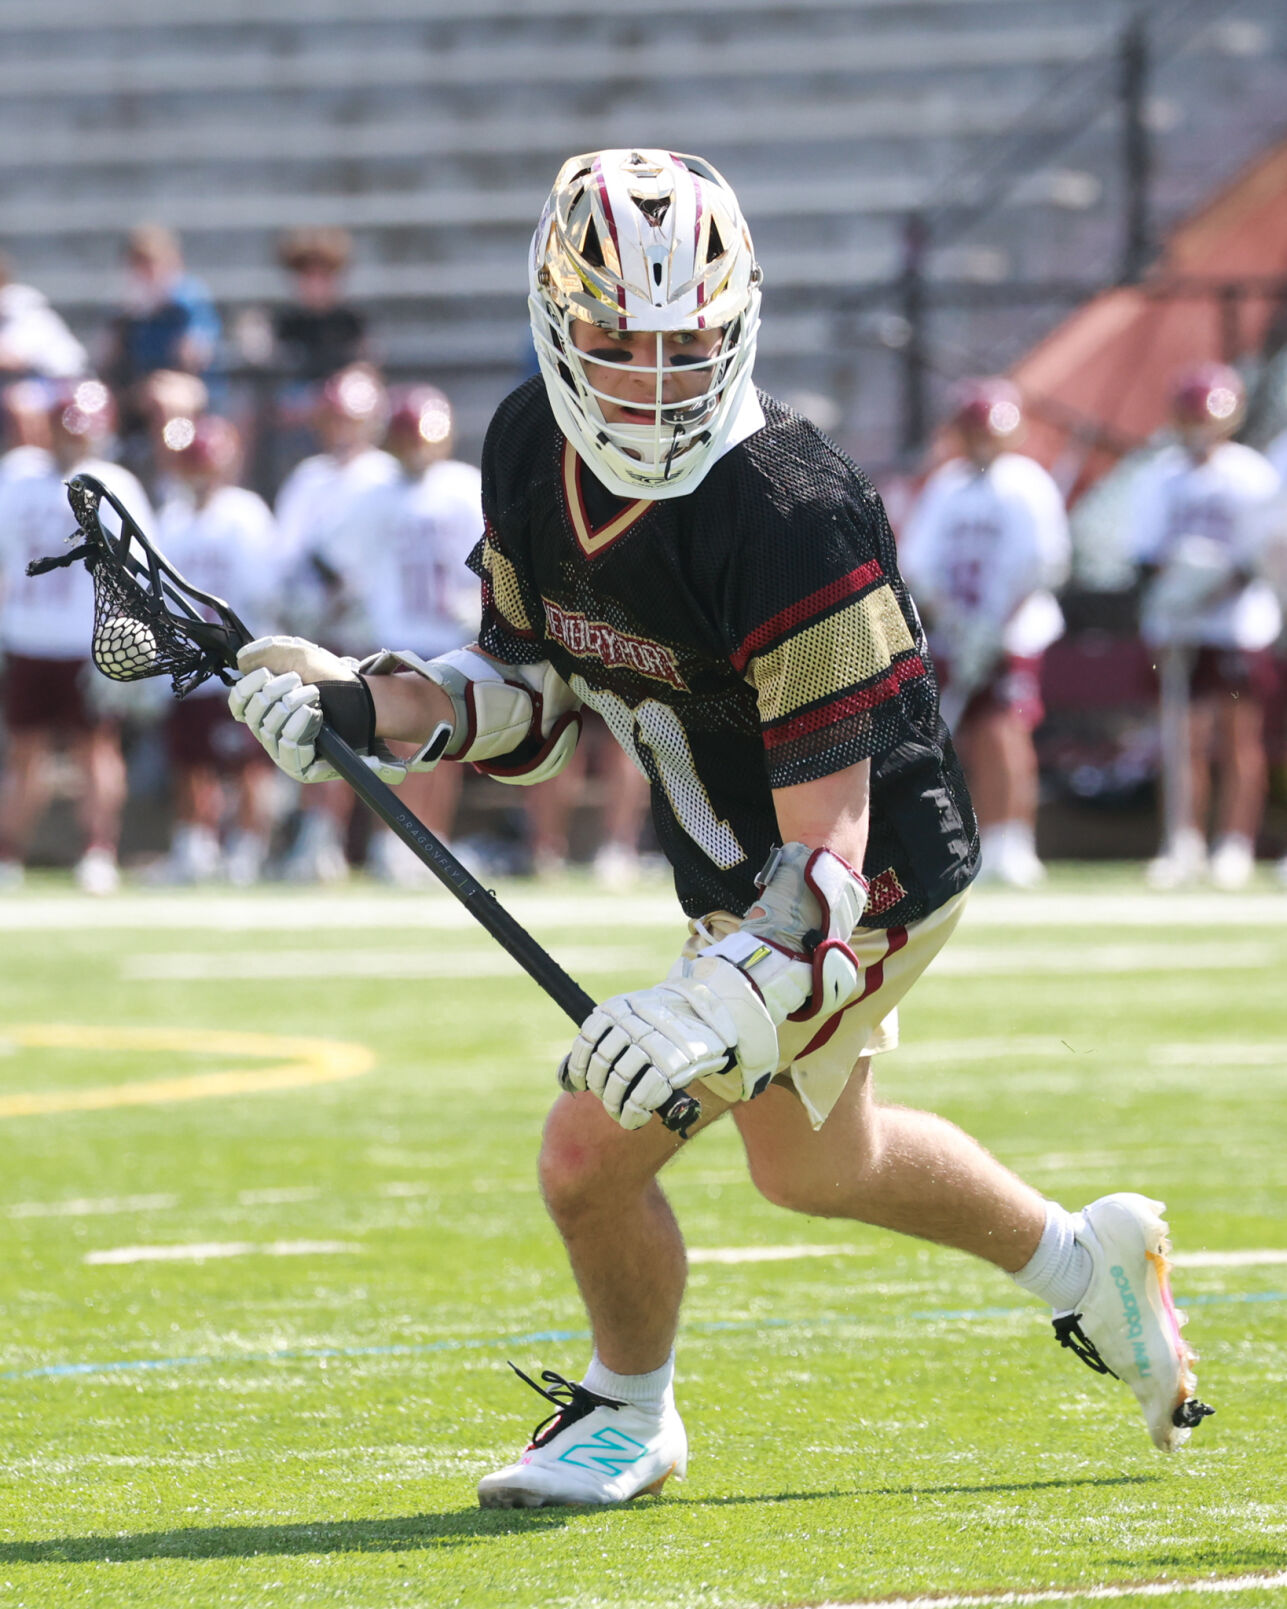 CAL Boys Lacrosse Preview: Newburyport Ready to Reclaim Kinney Title with Strong Lineup